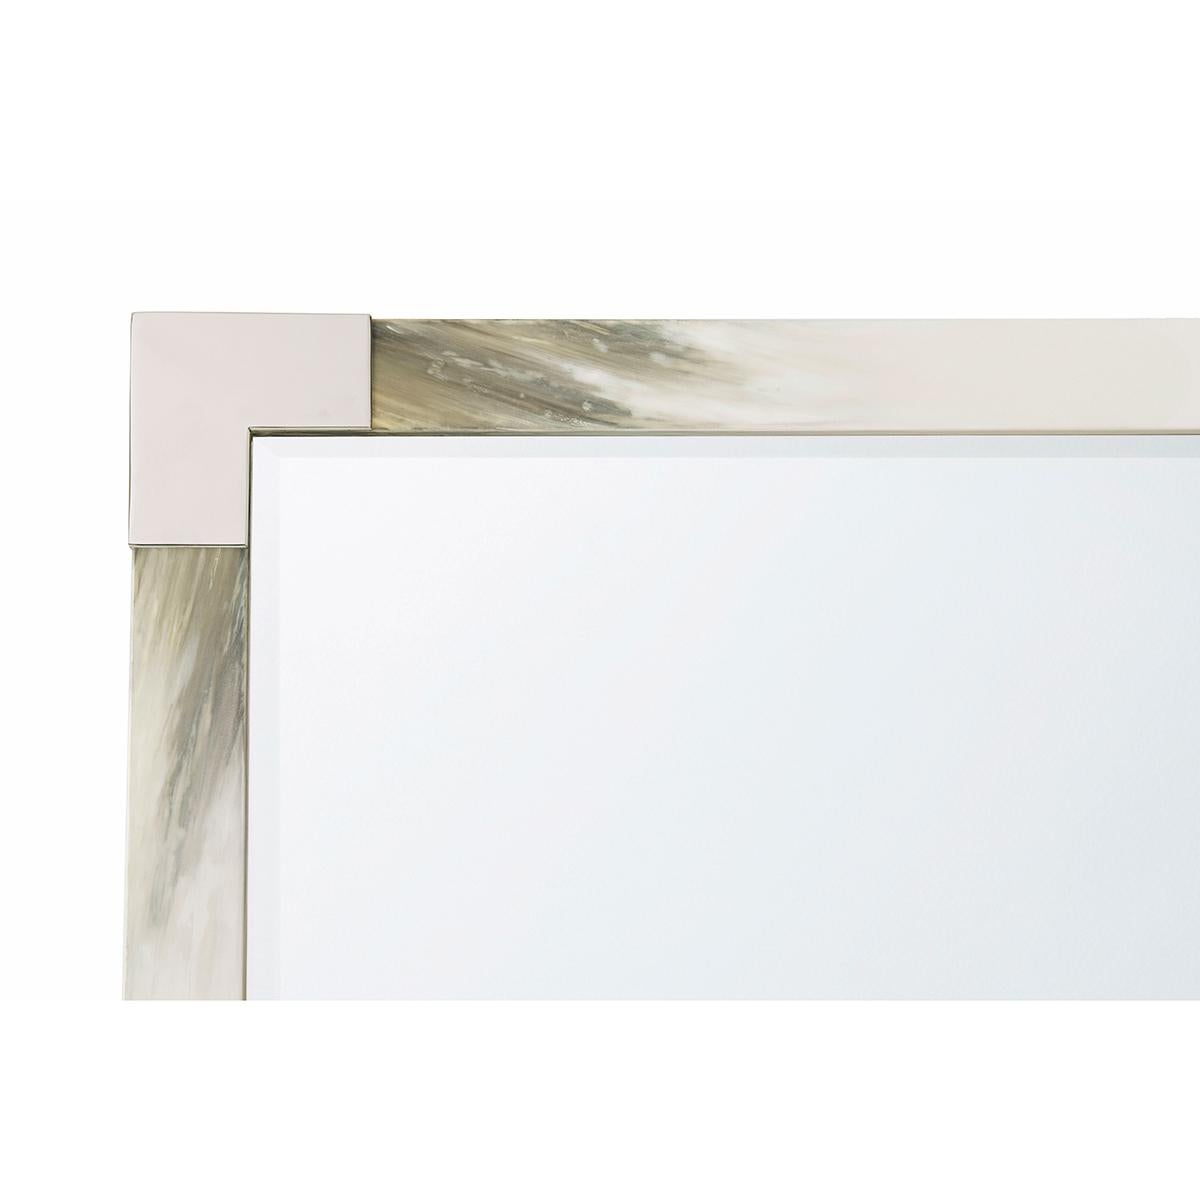 A hand-painted faux horn wooden frame with a beveled glass mirror plate. Each corner is bound in a stainless steel clasp.

Dimensions: 35.75